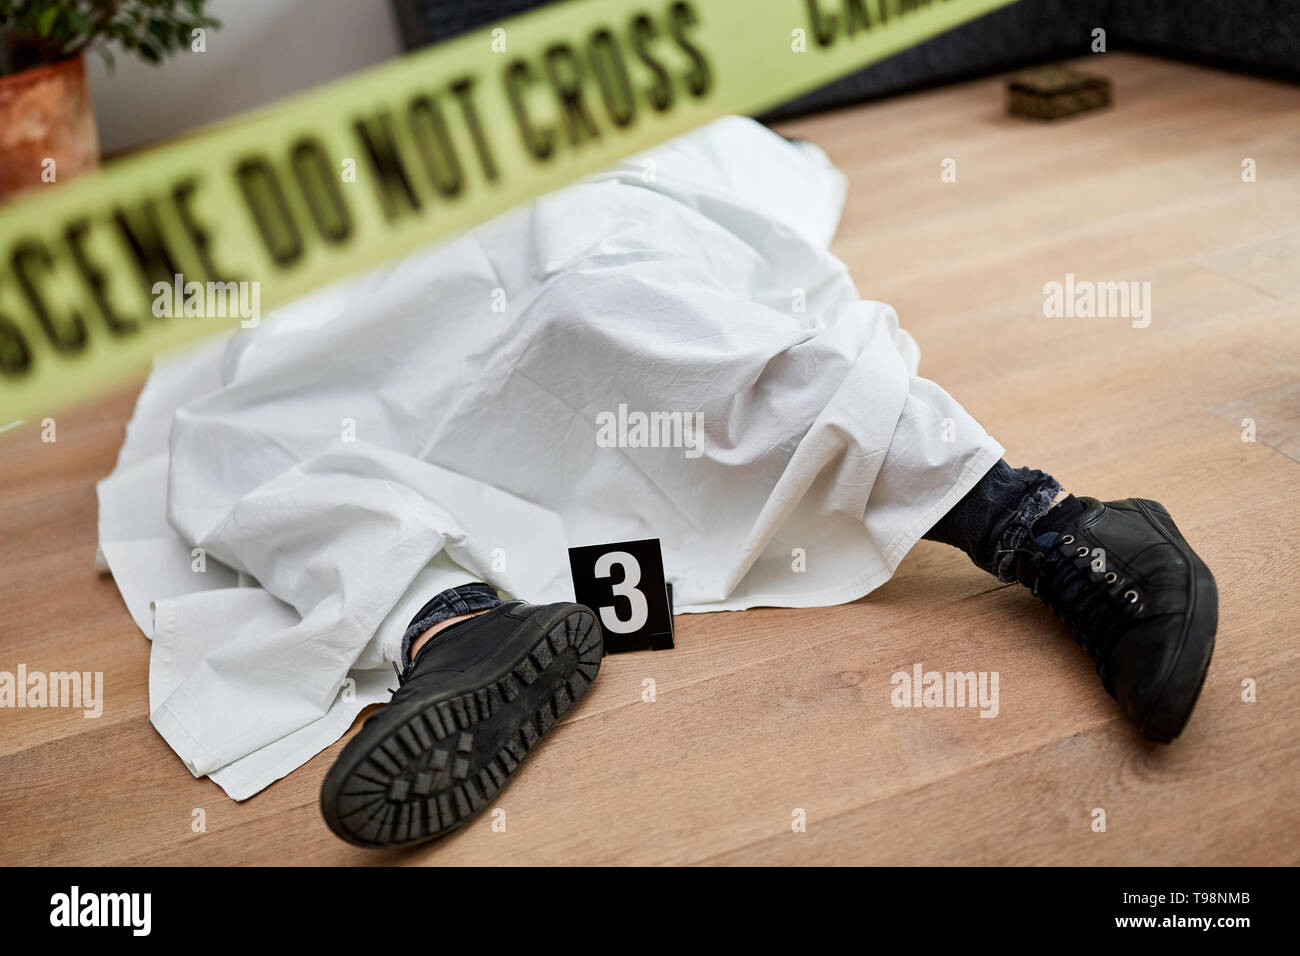 Dead body after murder at the scene after forensics by the police Stock Photo